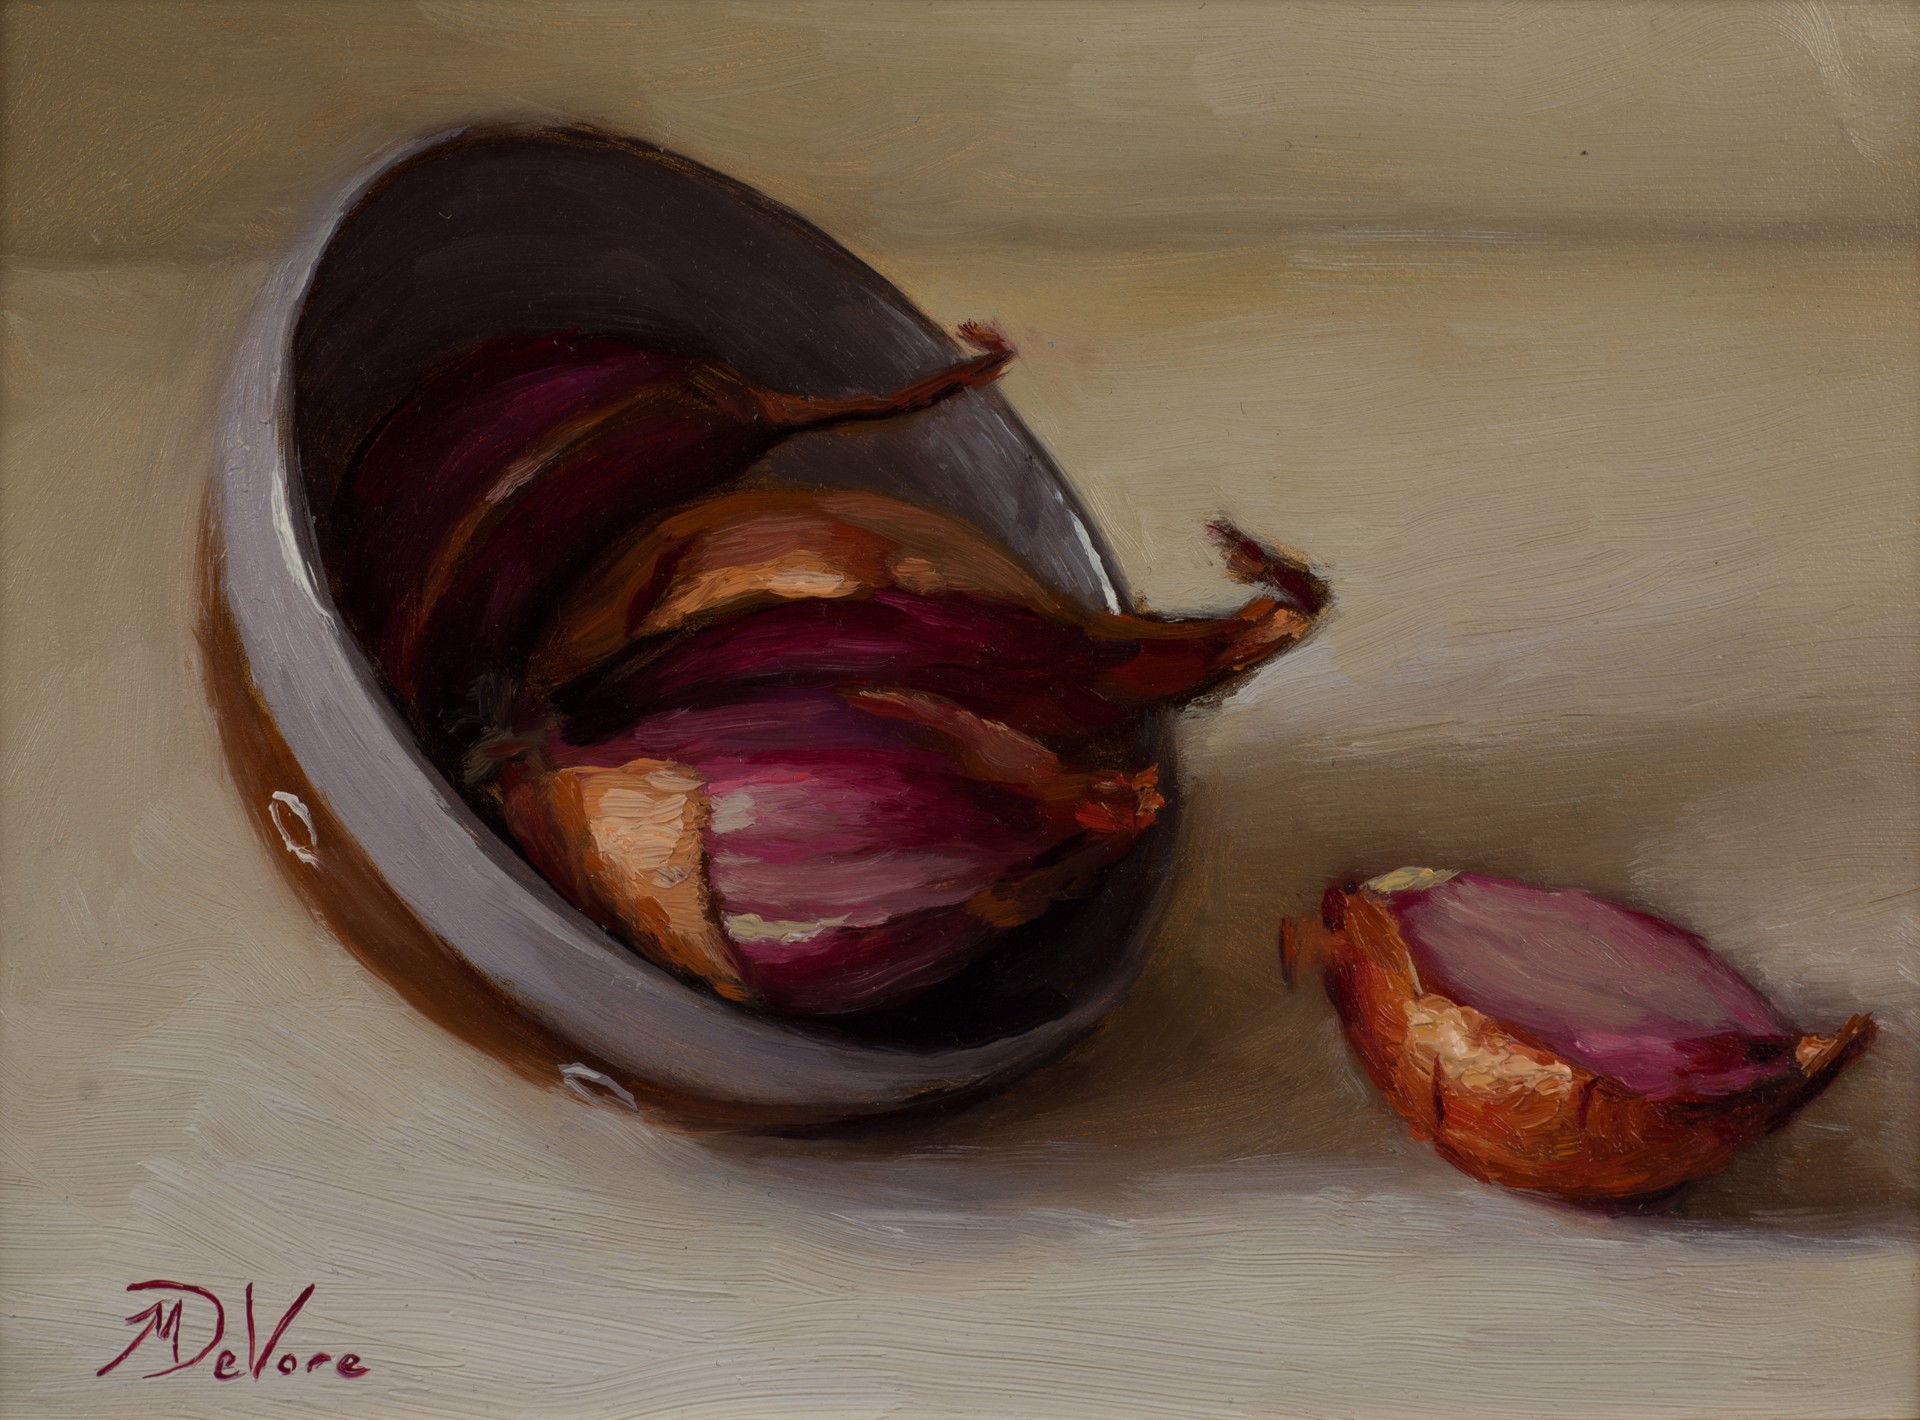 Spilled Shallots by Michael DeVore